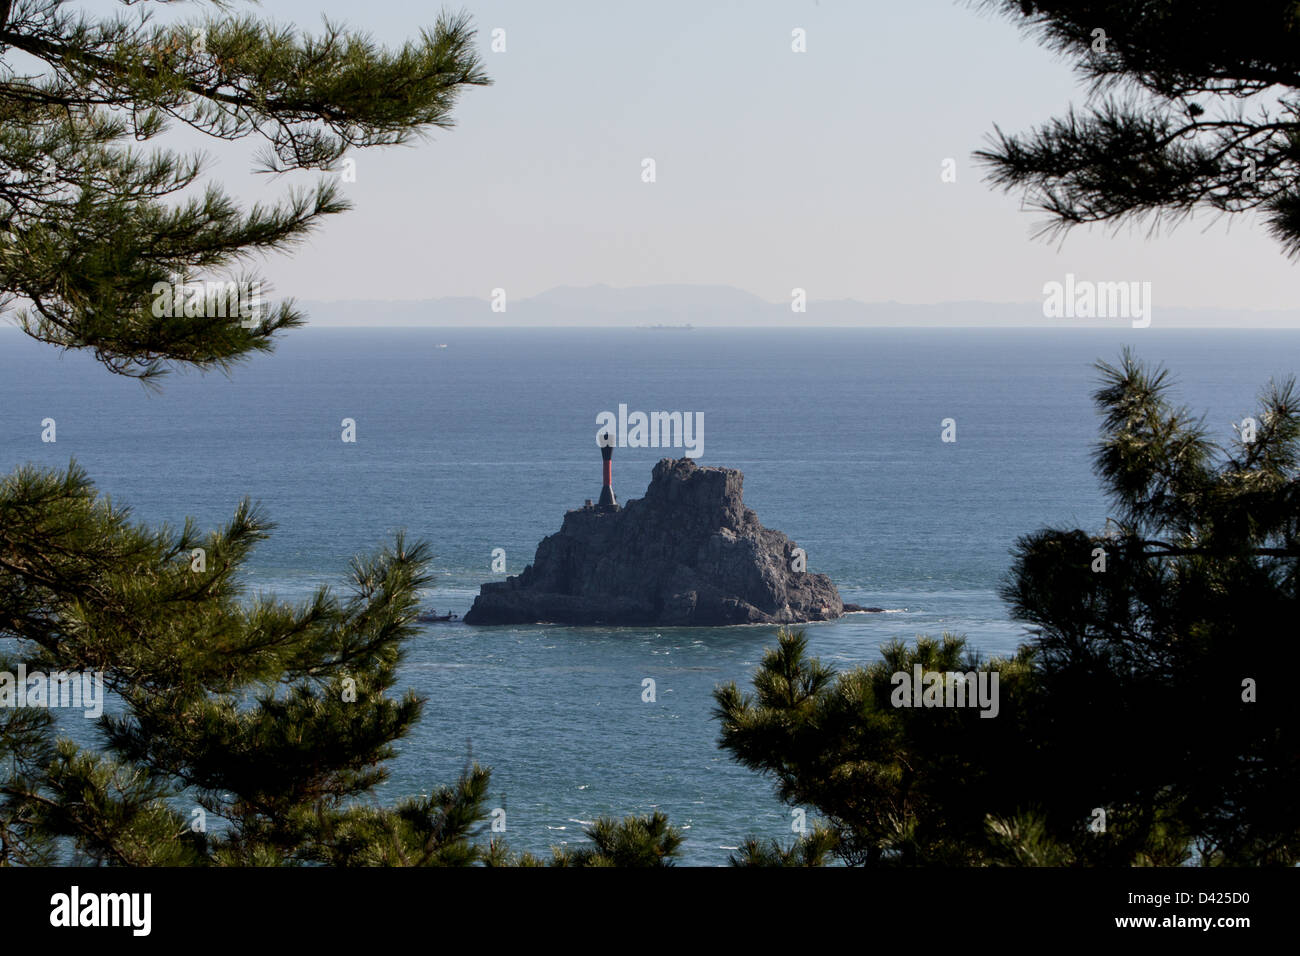 In the background you can see Japanese islands of Tsushima seen from Busan City in South Korea Stock Photo